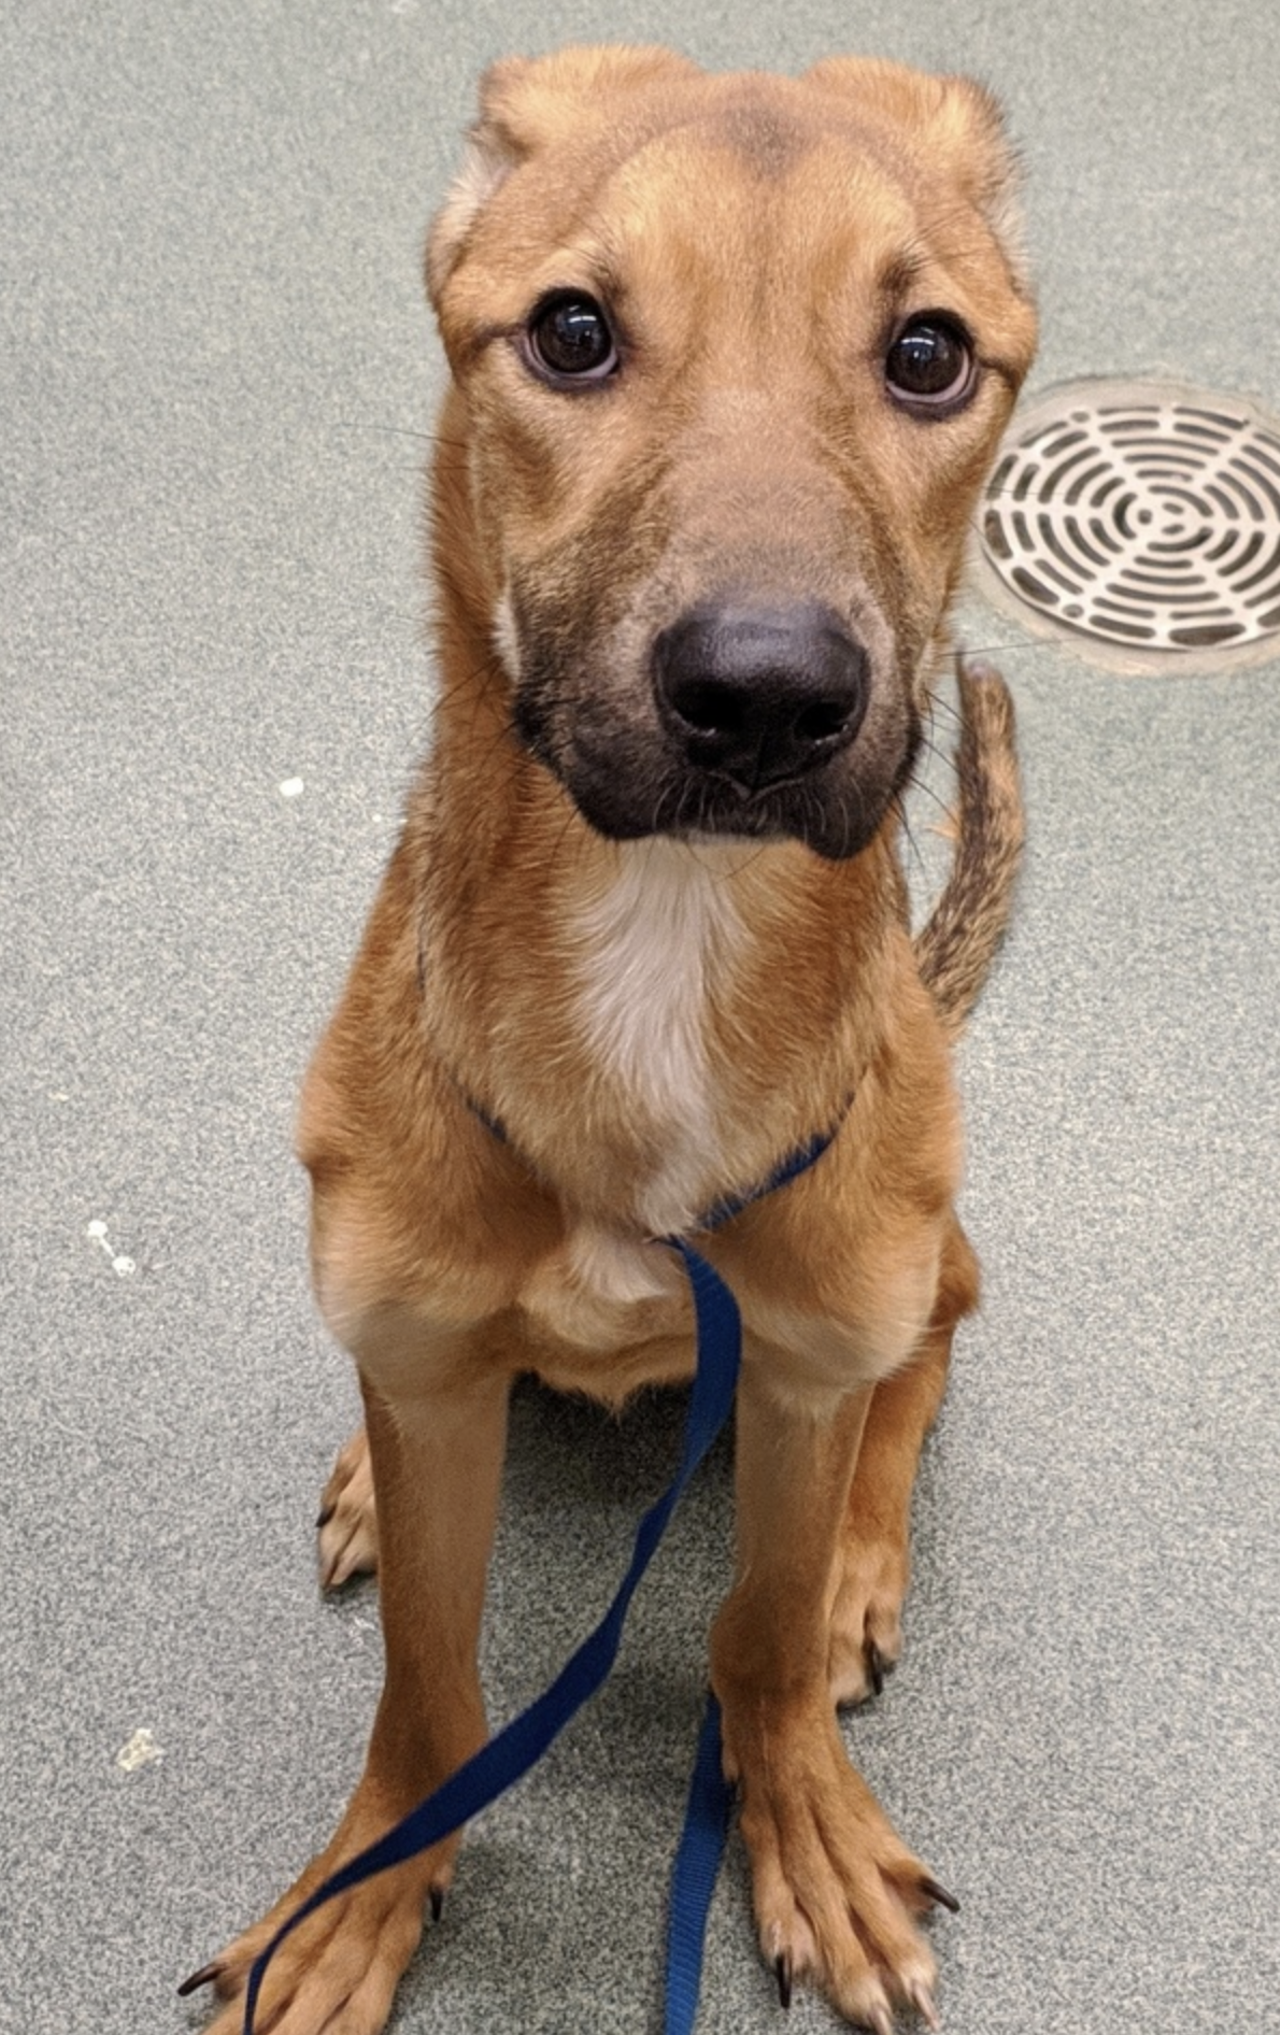 Norbert
Age: 5 years old / Breed: Shepherd Cross Hound / Sex: Male
Norbert is an adorable shepherd and hound cross who is healthy, up-to-date on his vaccines and neutered.